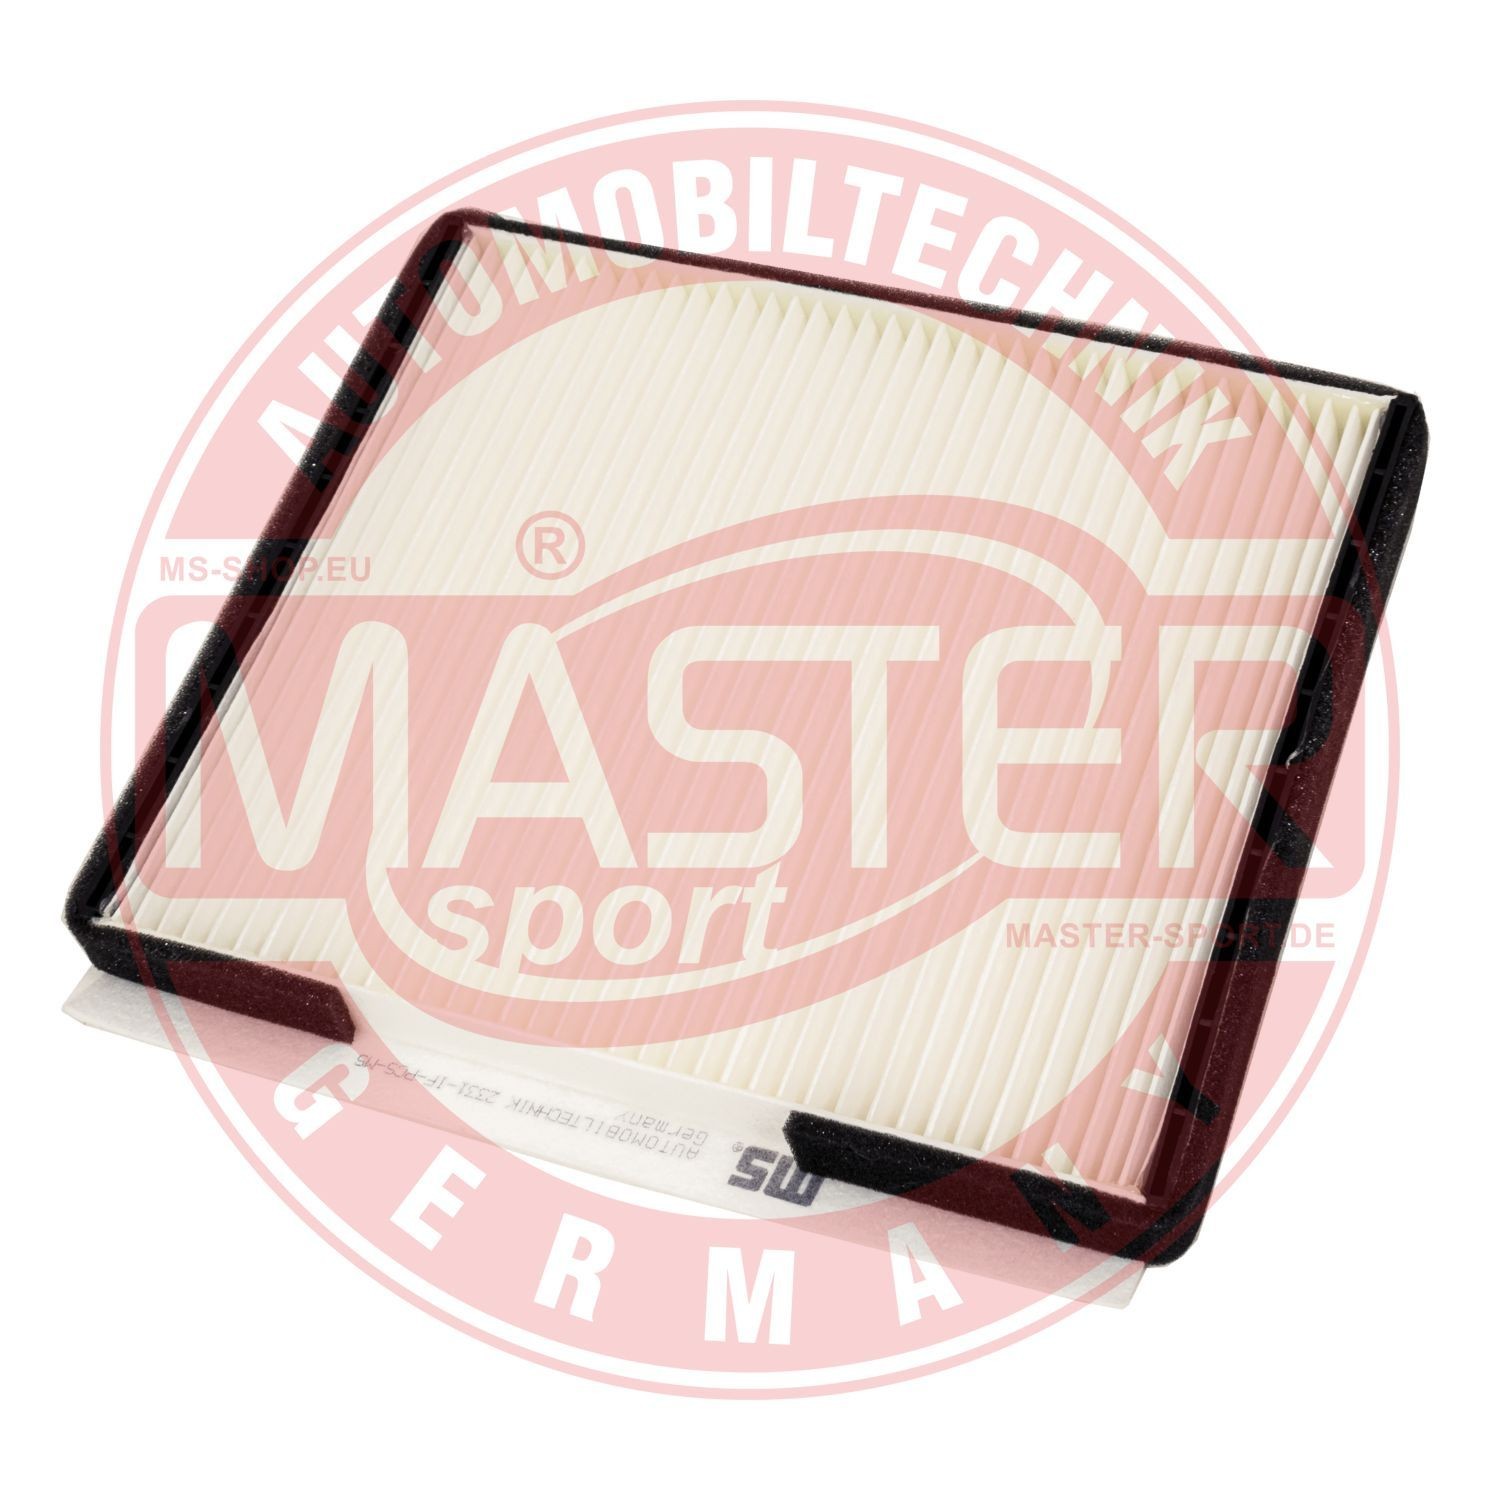 MASTER-SPORT Air conditioning filter 2331-IF-PCS-MS